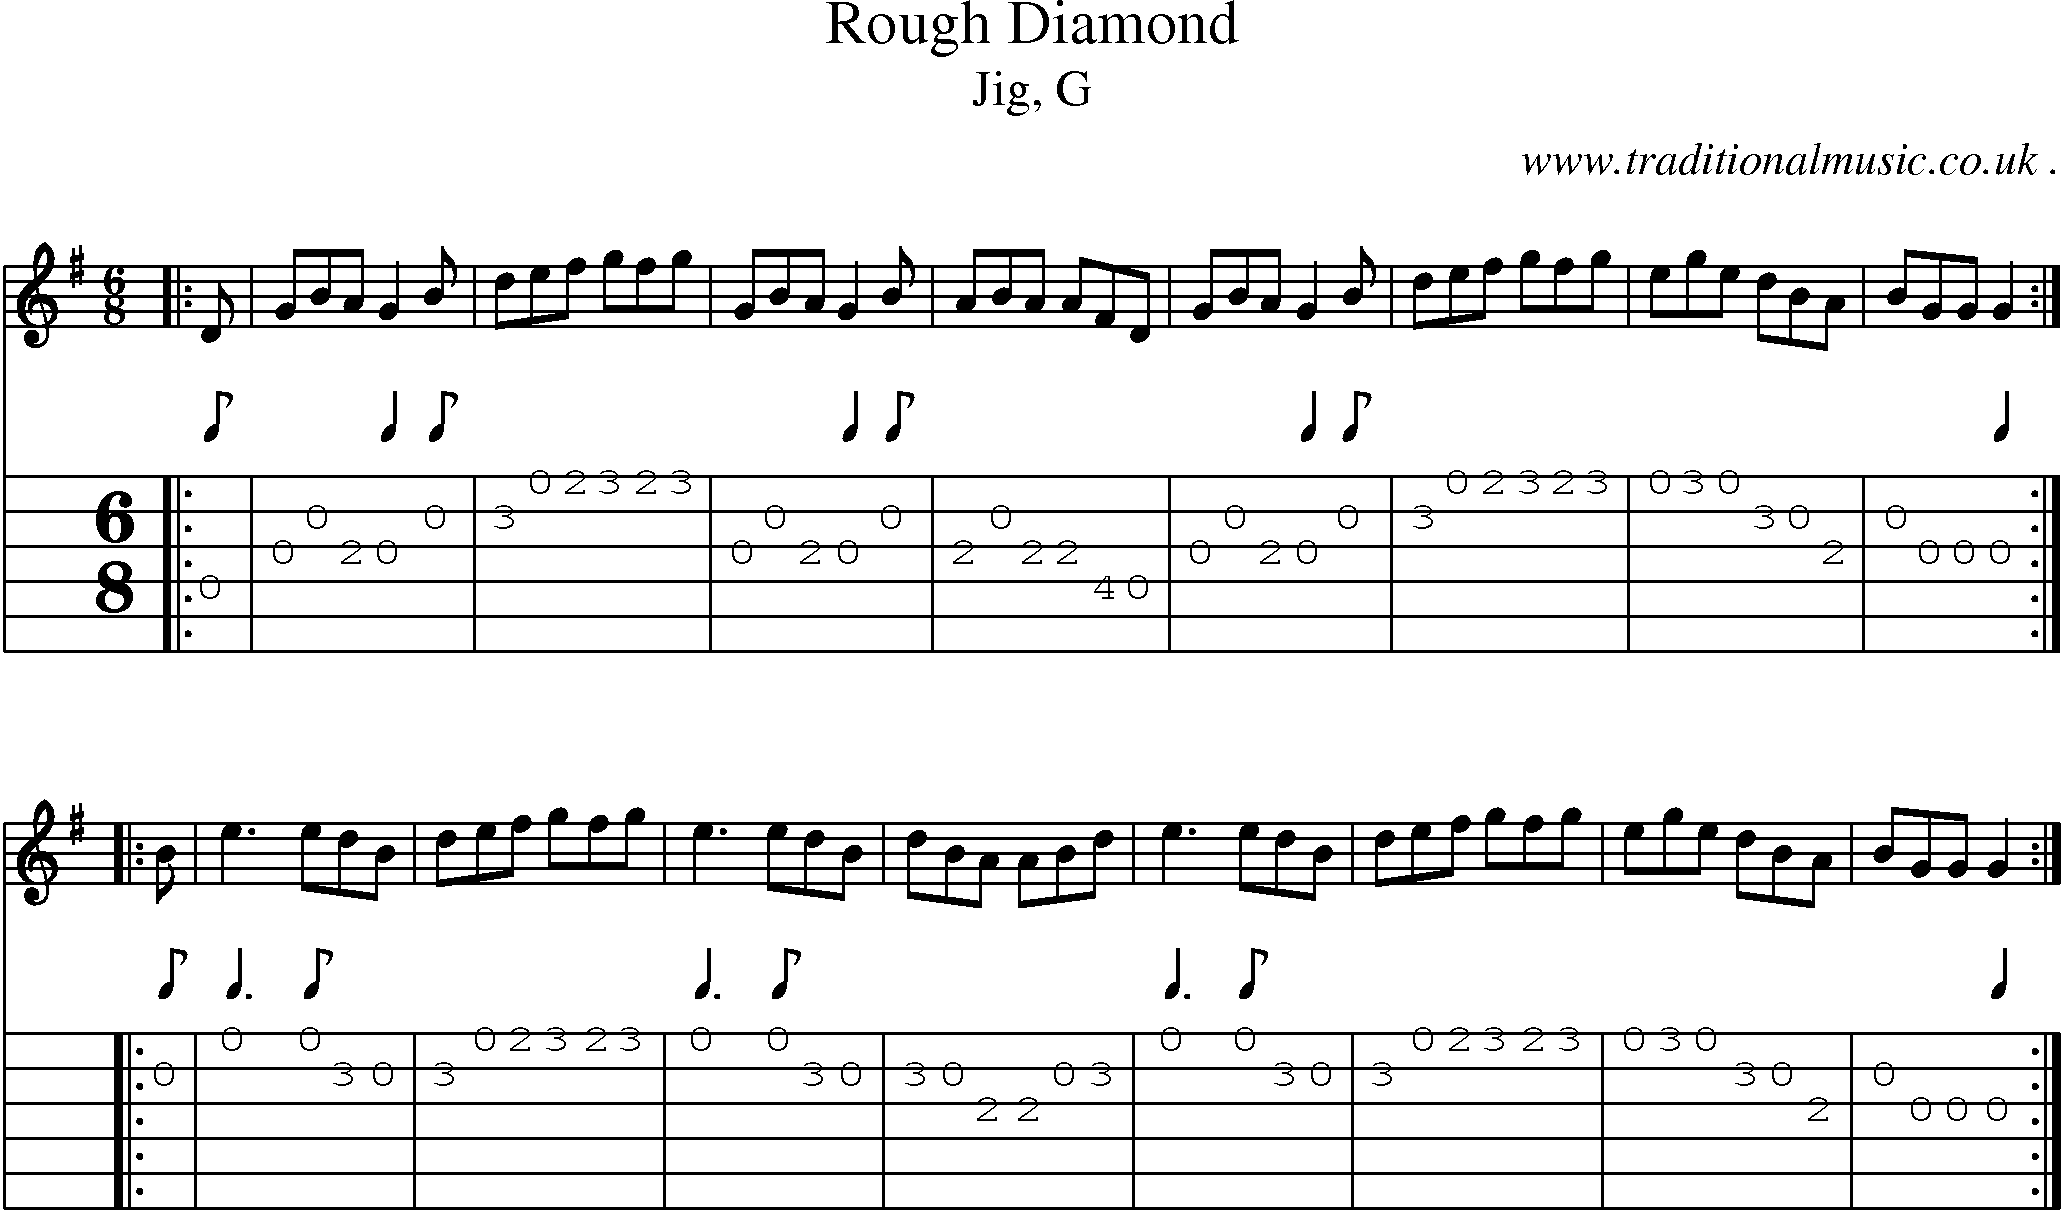 Sheet-music  score, Chords and Guitar Tabs for Rough Diamond